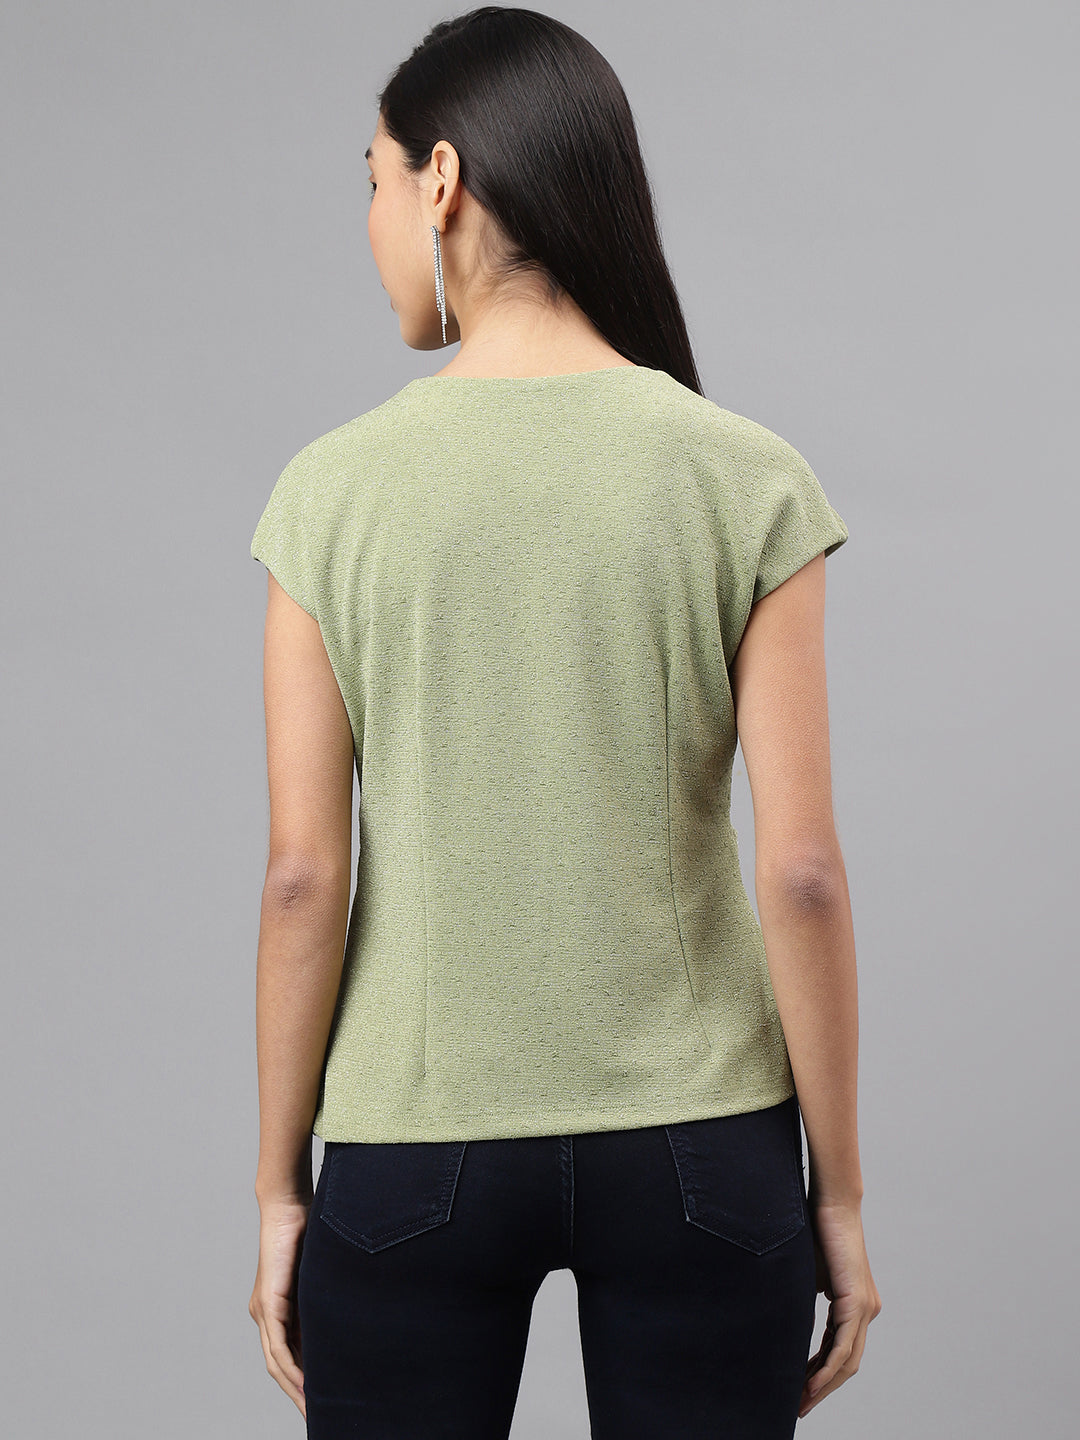 Green Cap Sleeve V-Neck Solid Knit Top